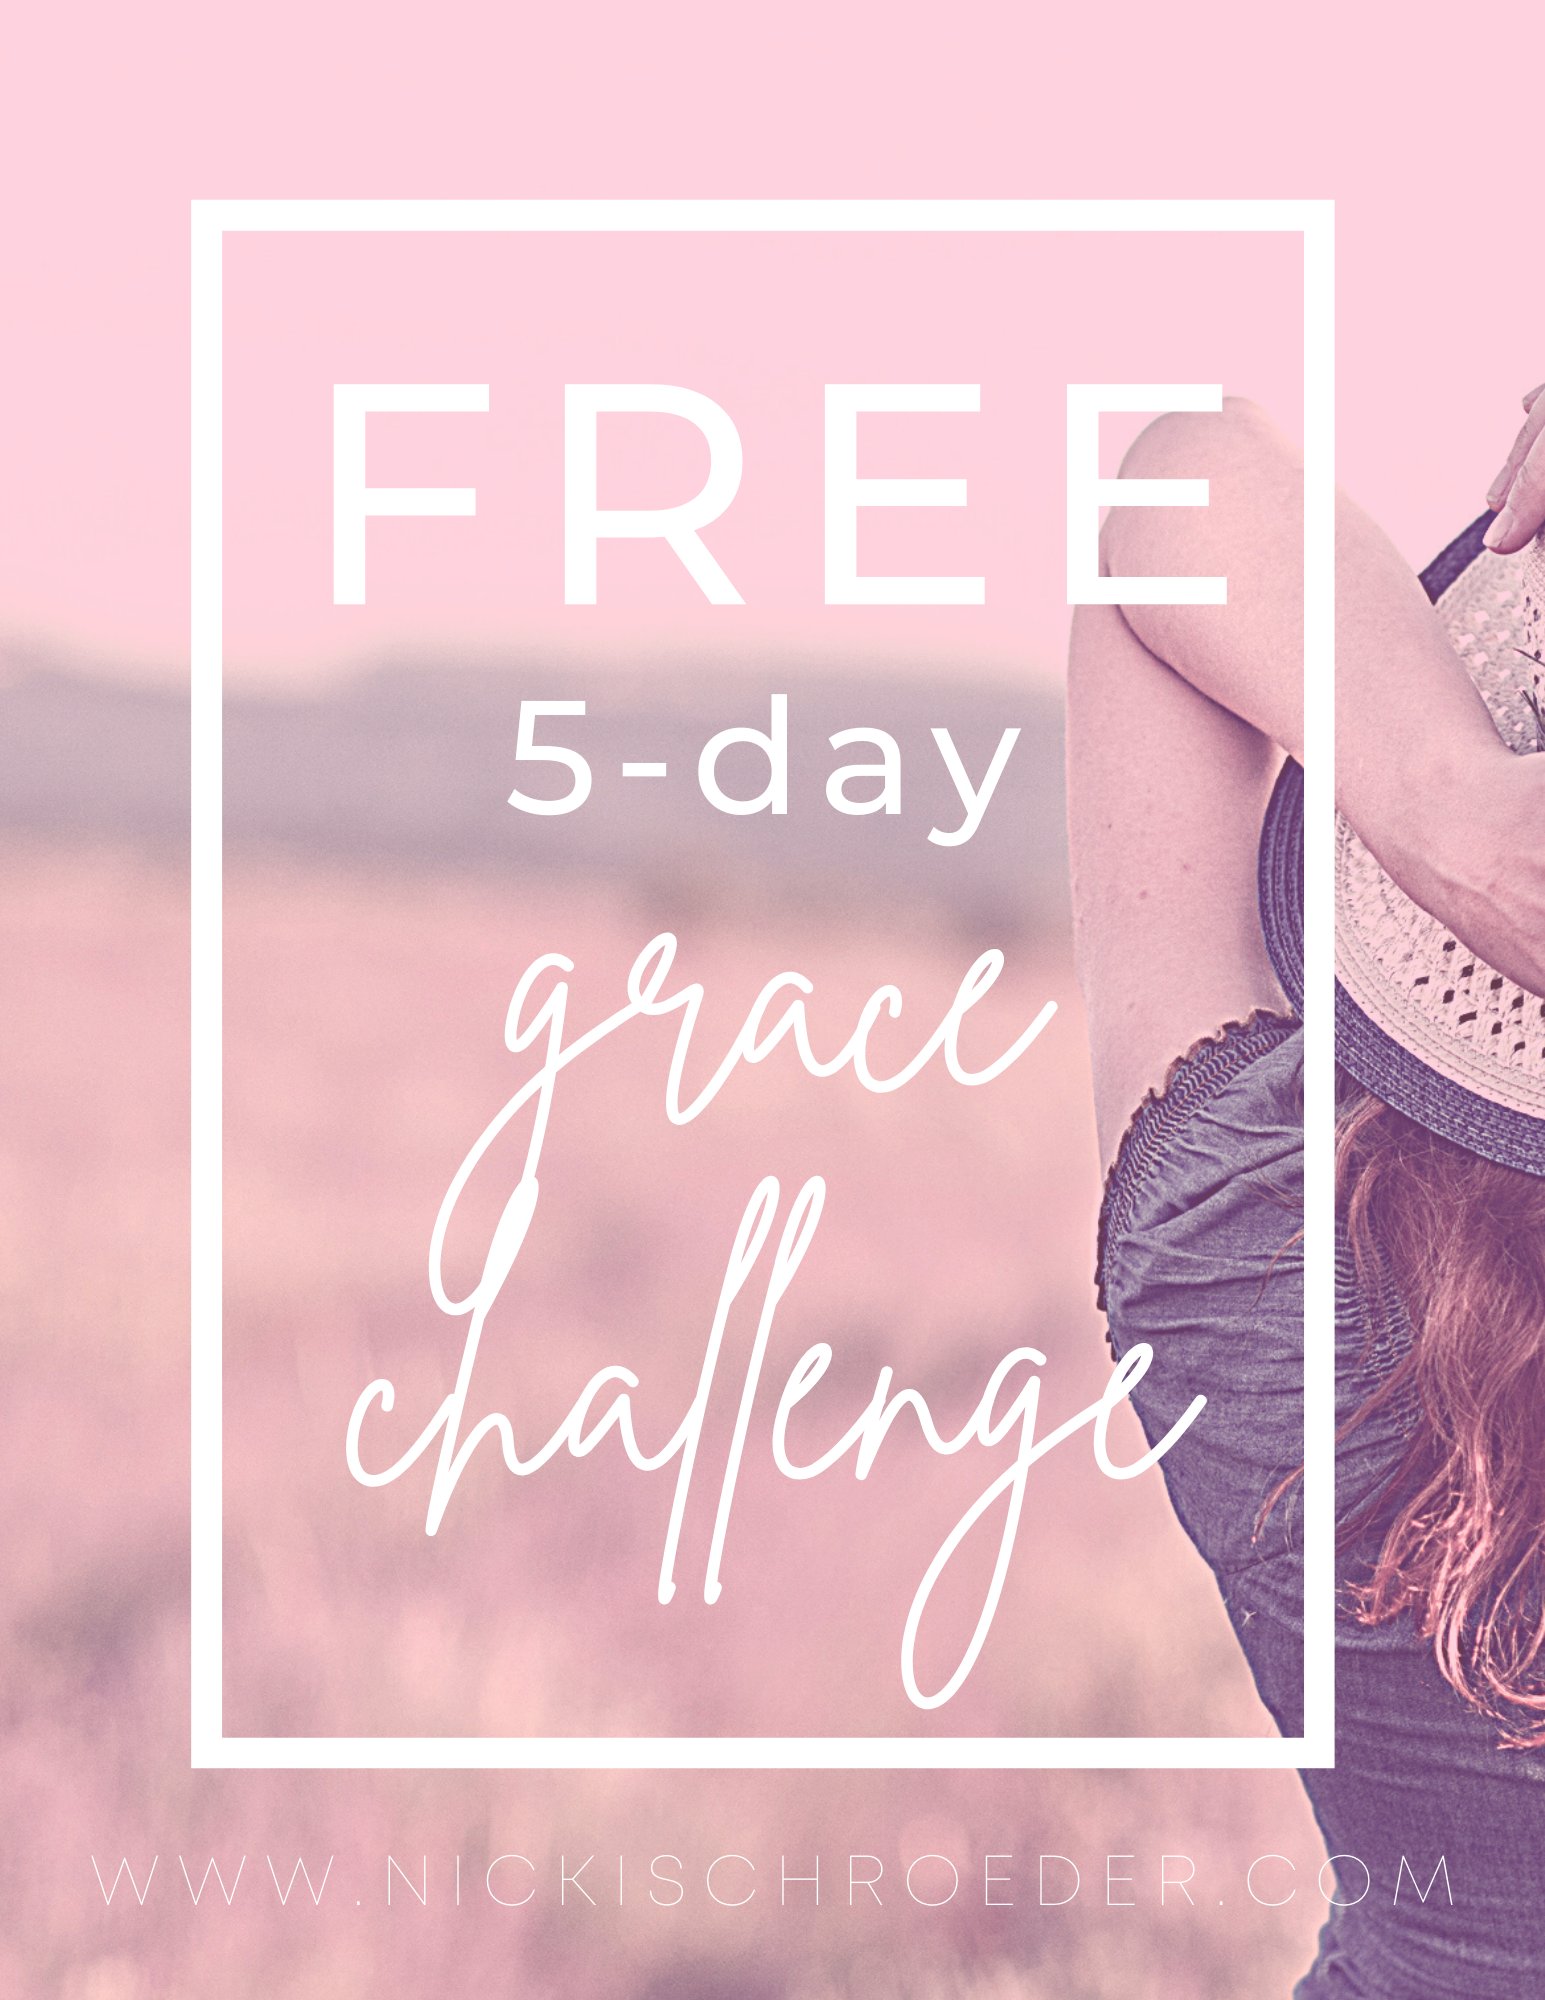 free 5-day grace challenge